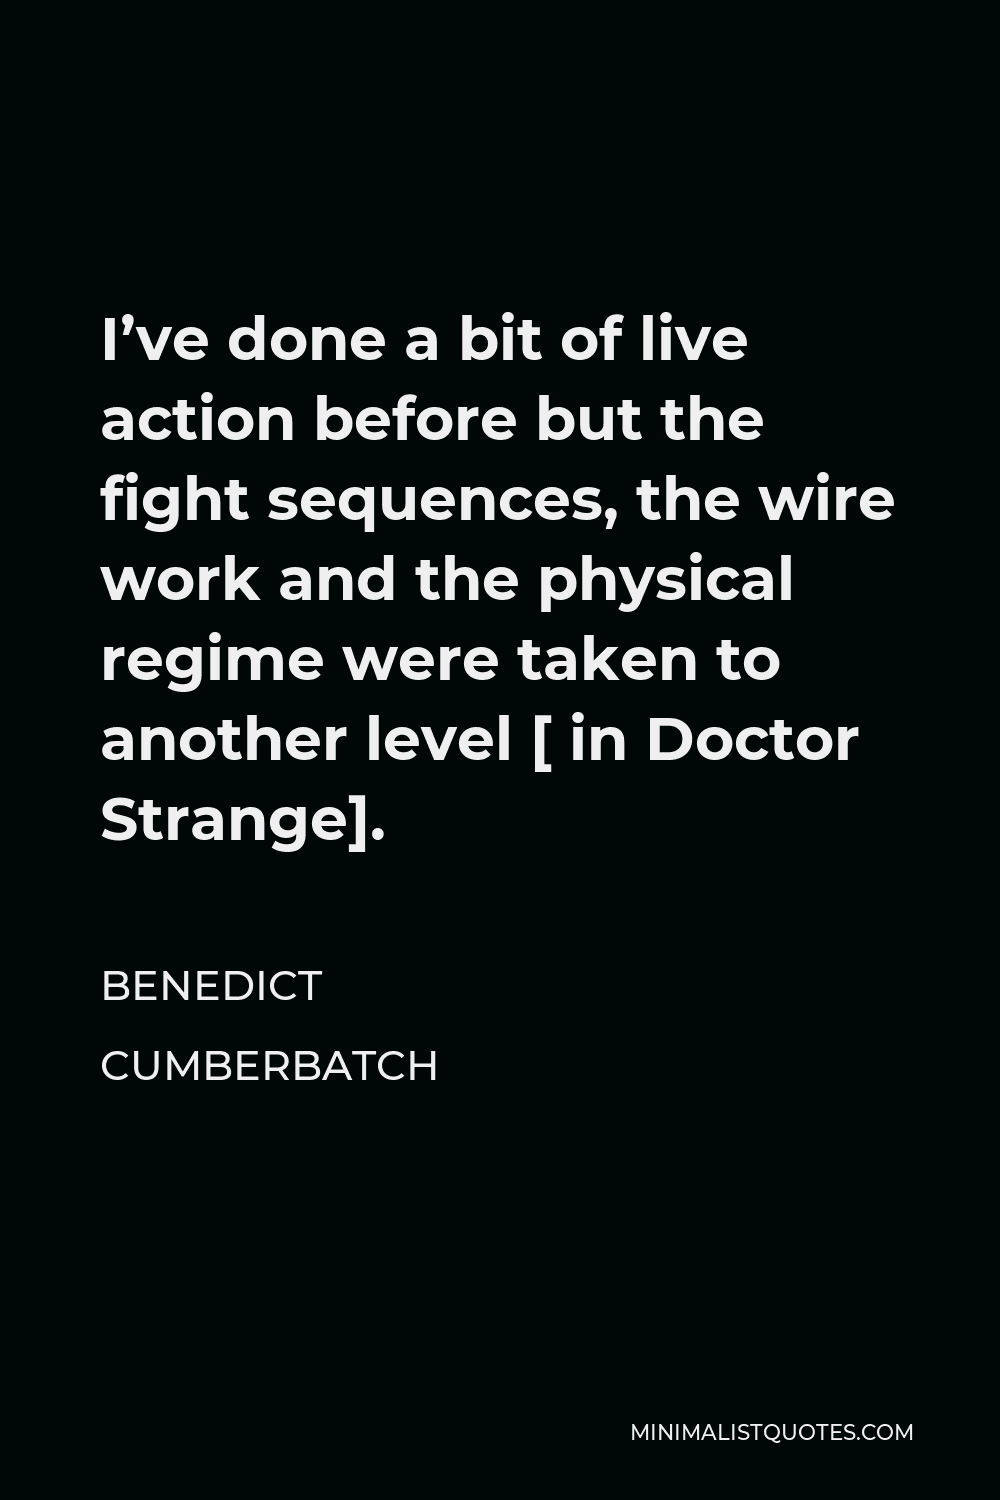 Benedict Cumberbatch Quote - I’ve done a bit of live action before but the fight sequences, the wire work and the physical regime were taken to another level [ in Doctor Strange].